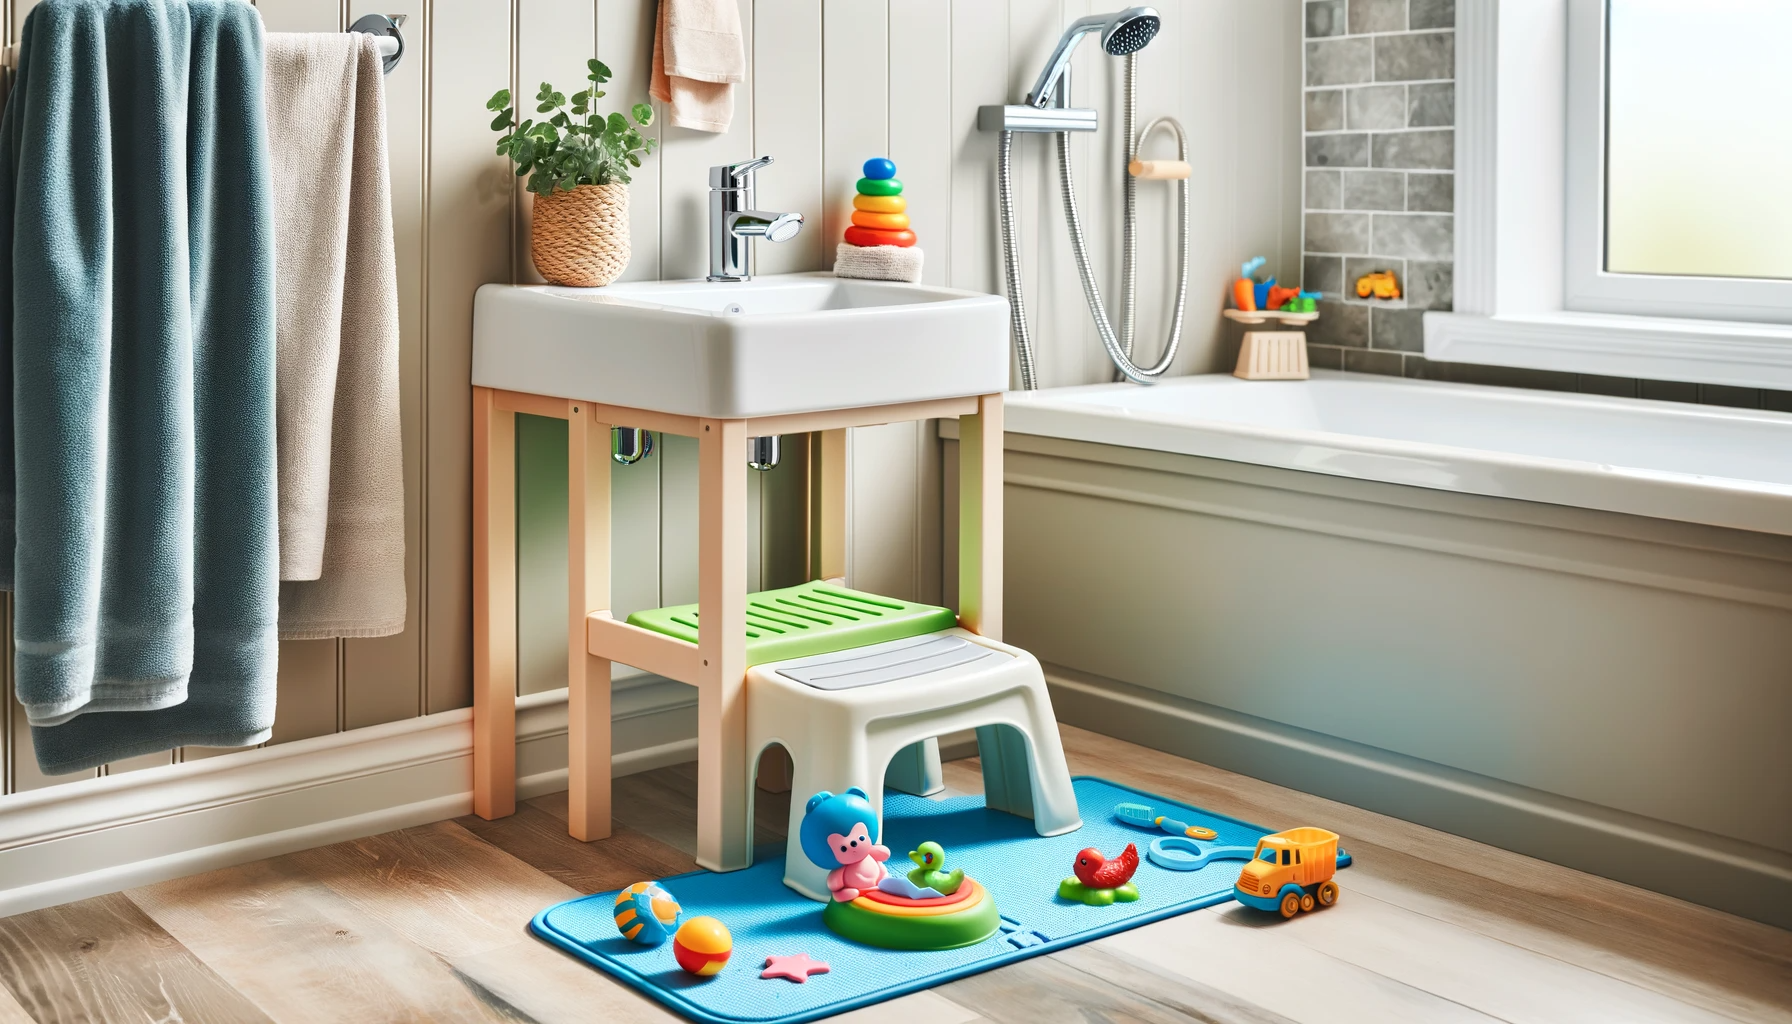 Child-friendly bathroom featuring a sturdy step stool by the sink